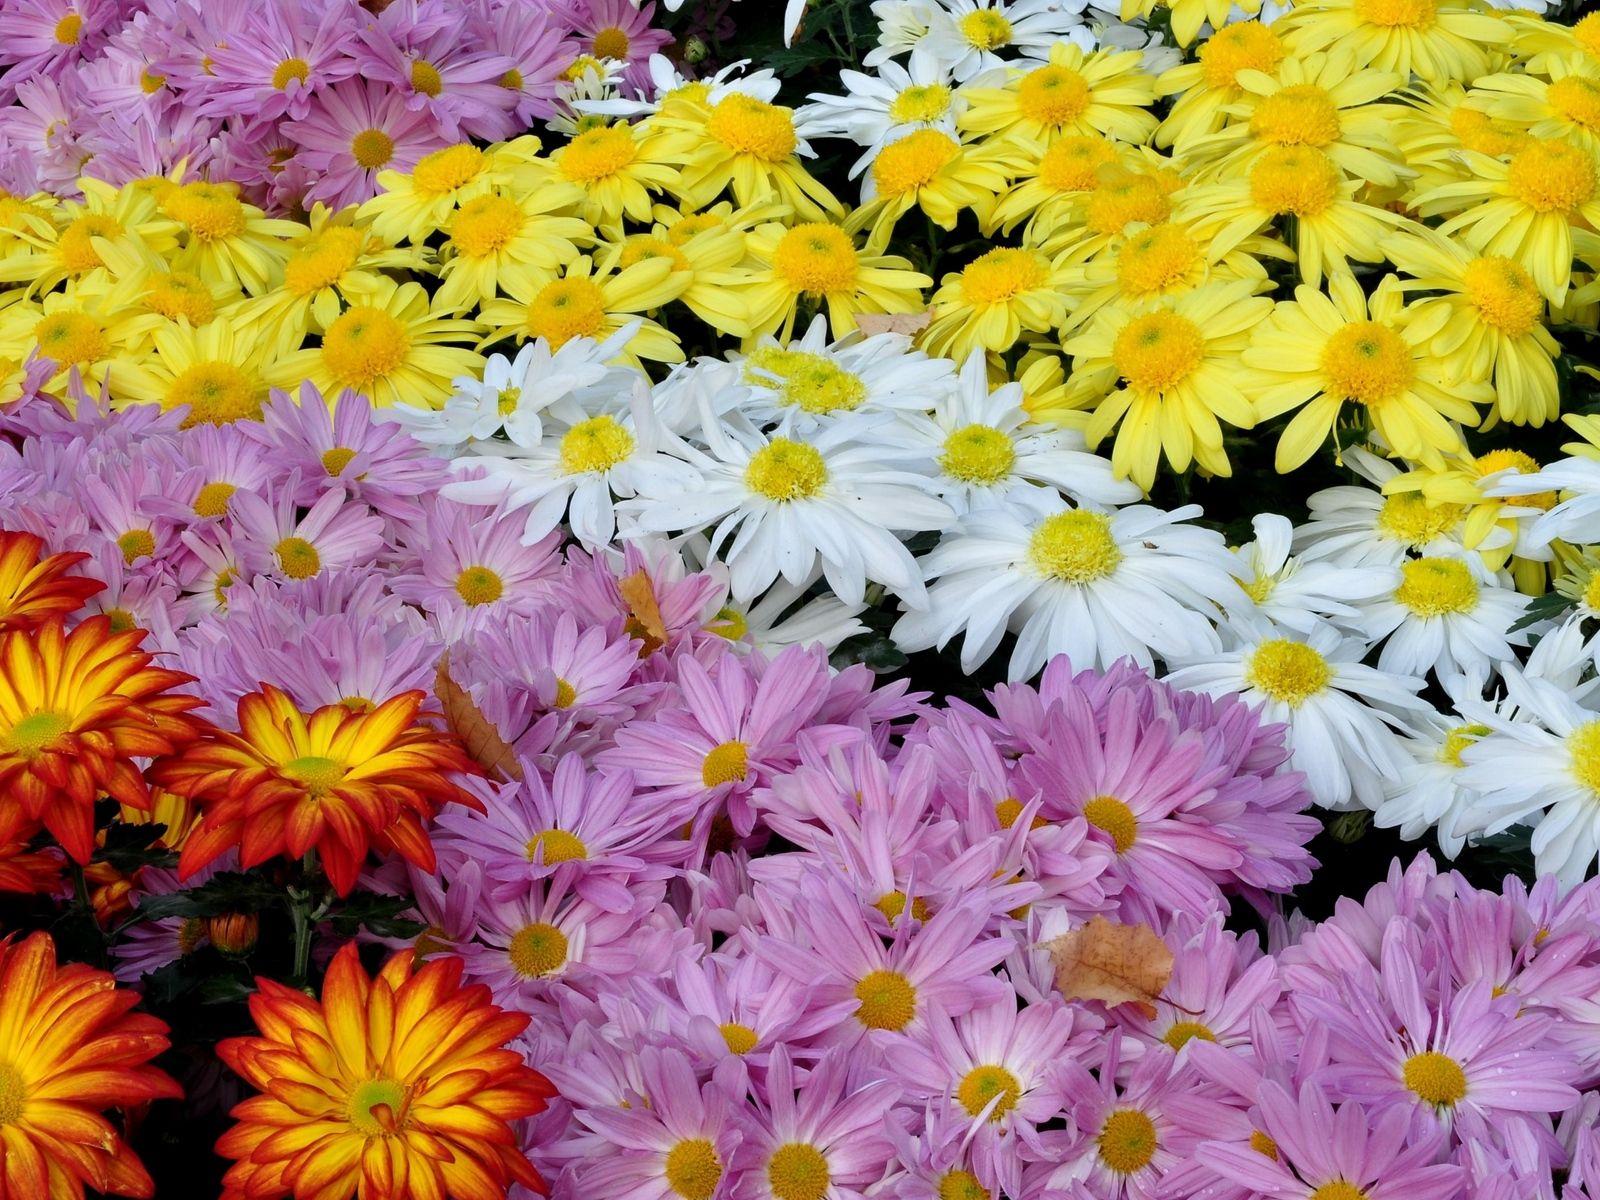 Download wallpaper 1600x1200 chrysanthemums, flowers, colorful